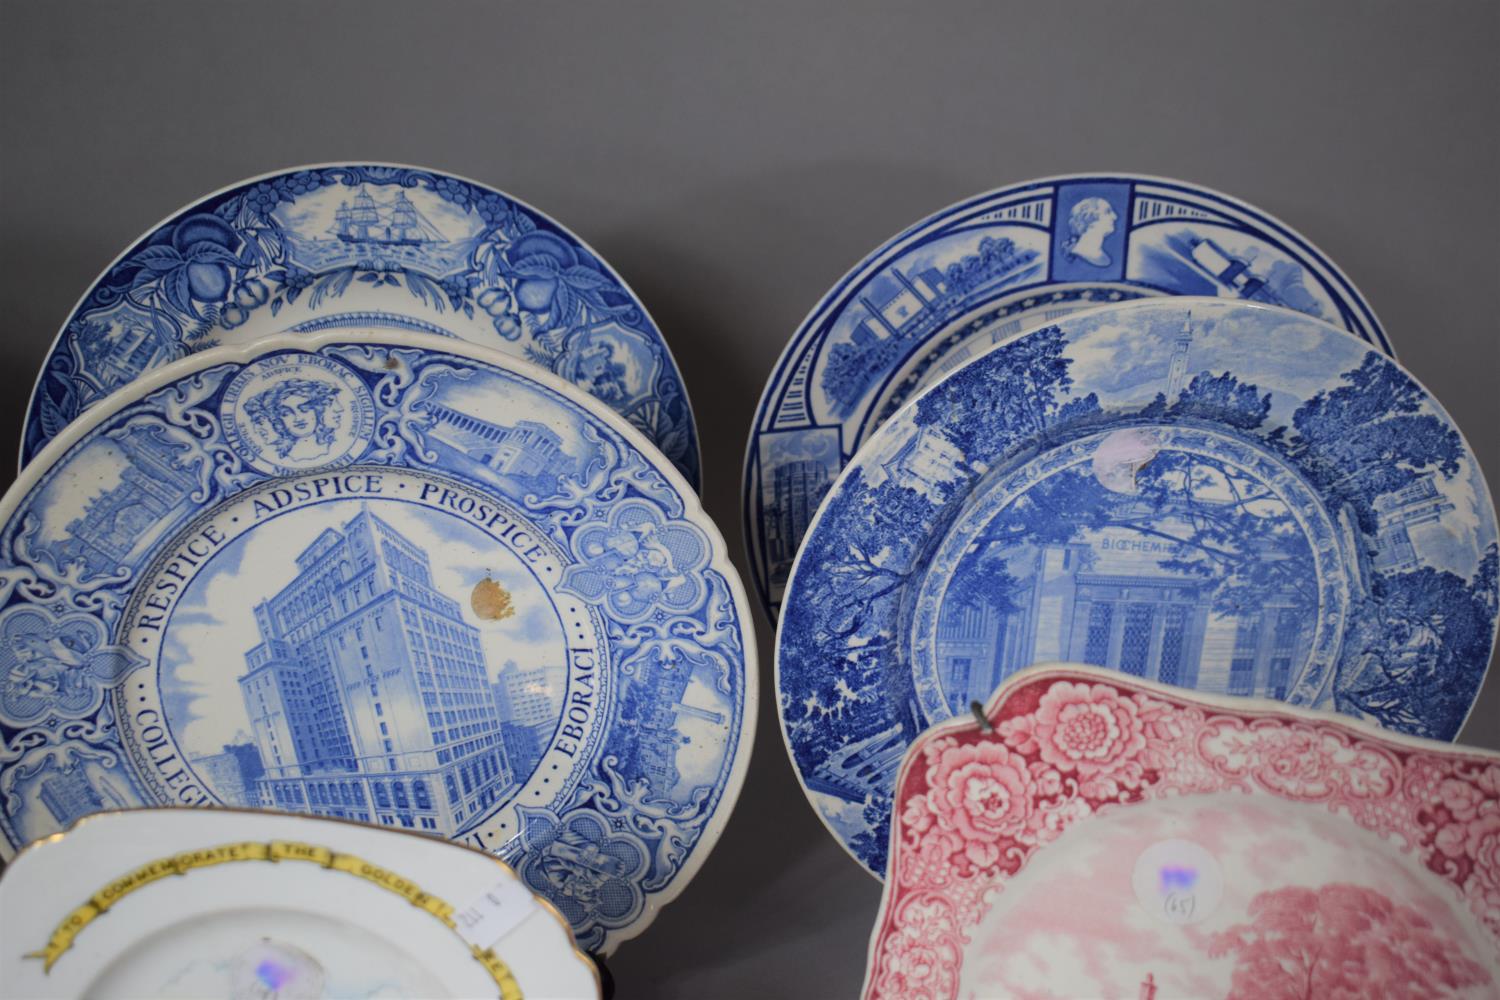 A Large Collection of Transfer Printed Commemorative Ceramics on a Topic of America and Canada to - Image 3 of 6